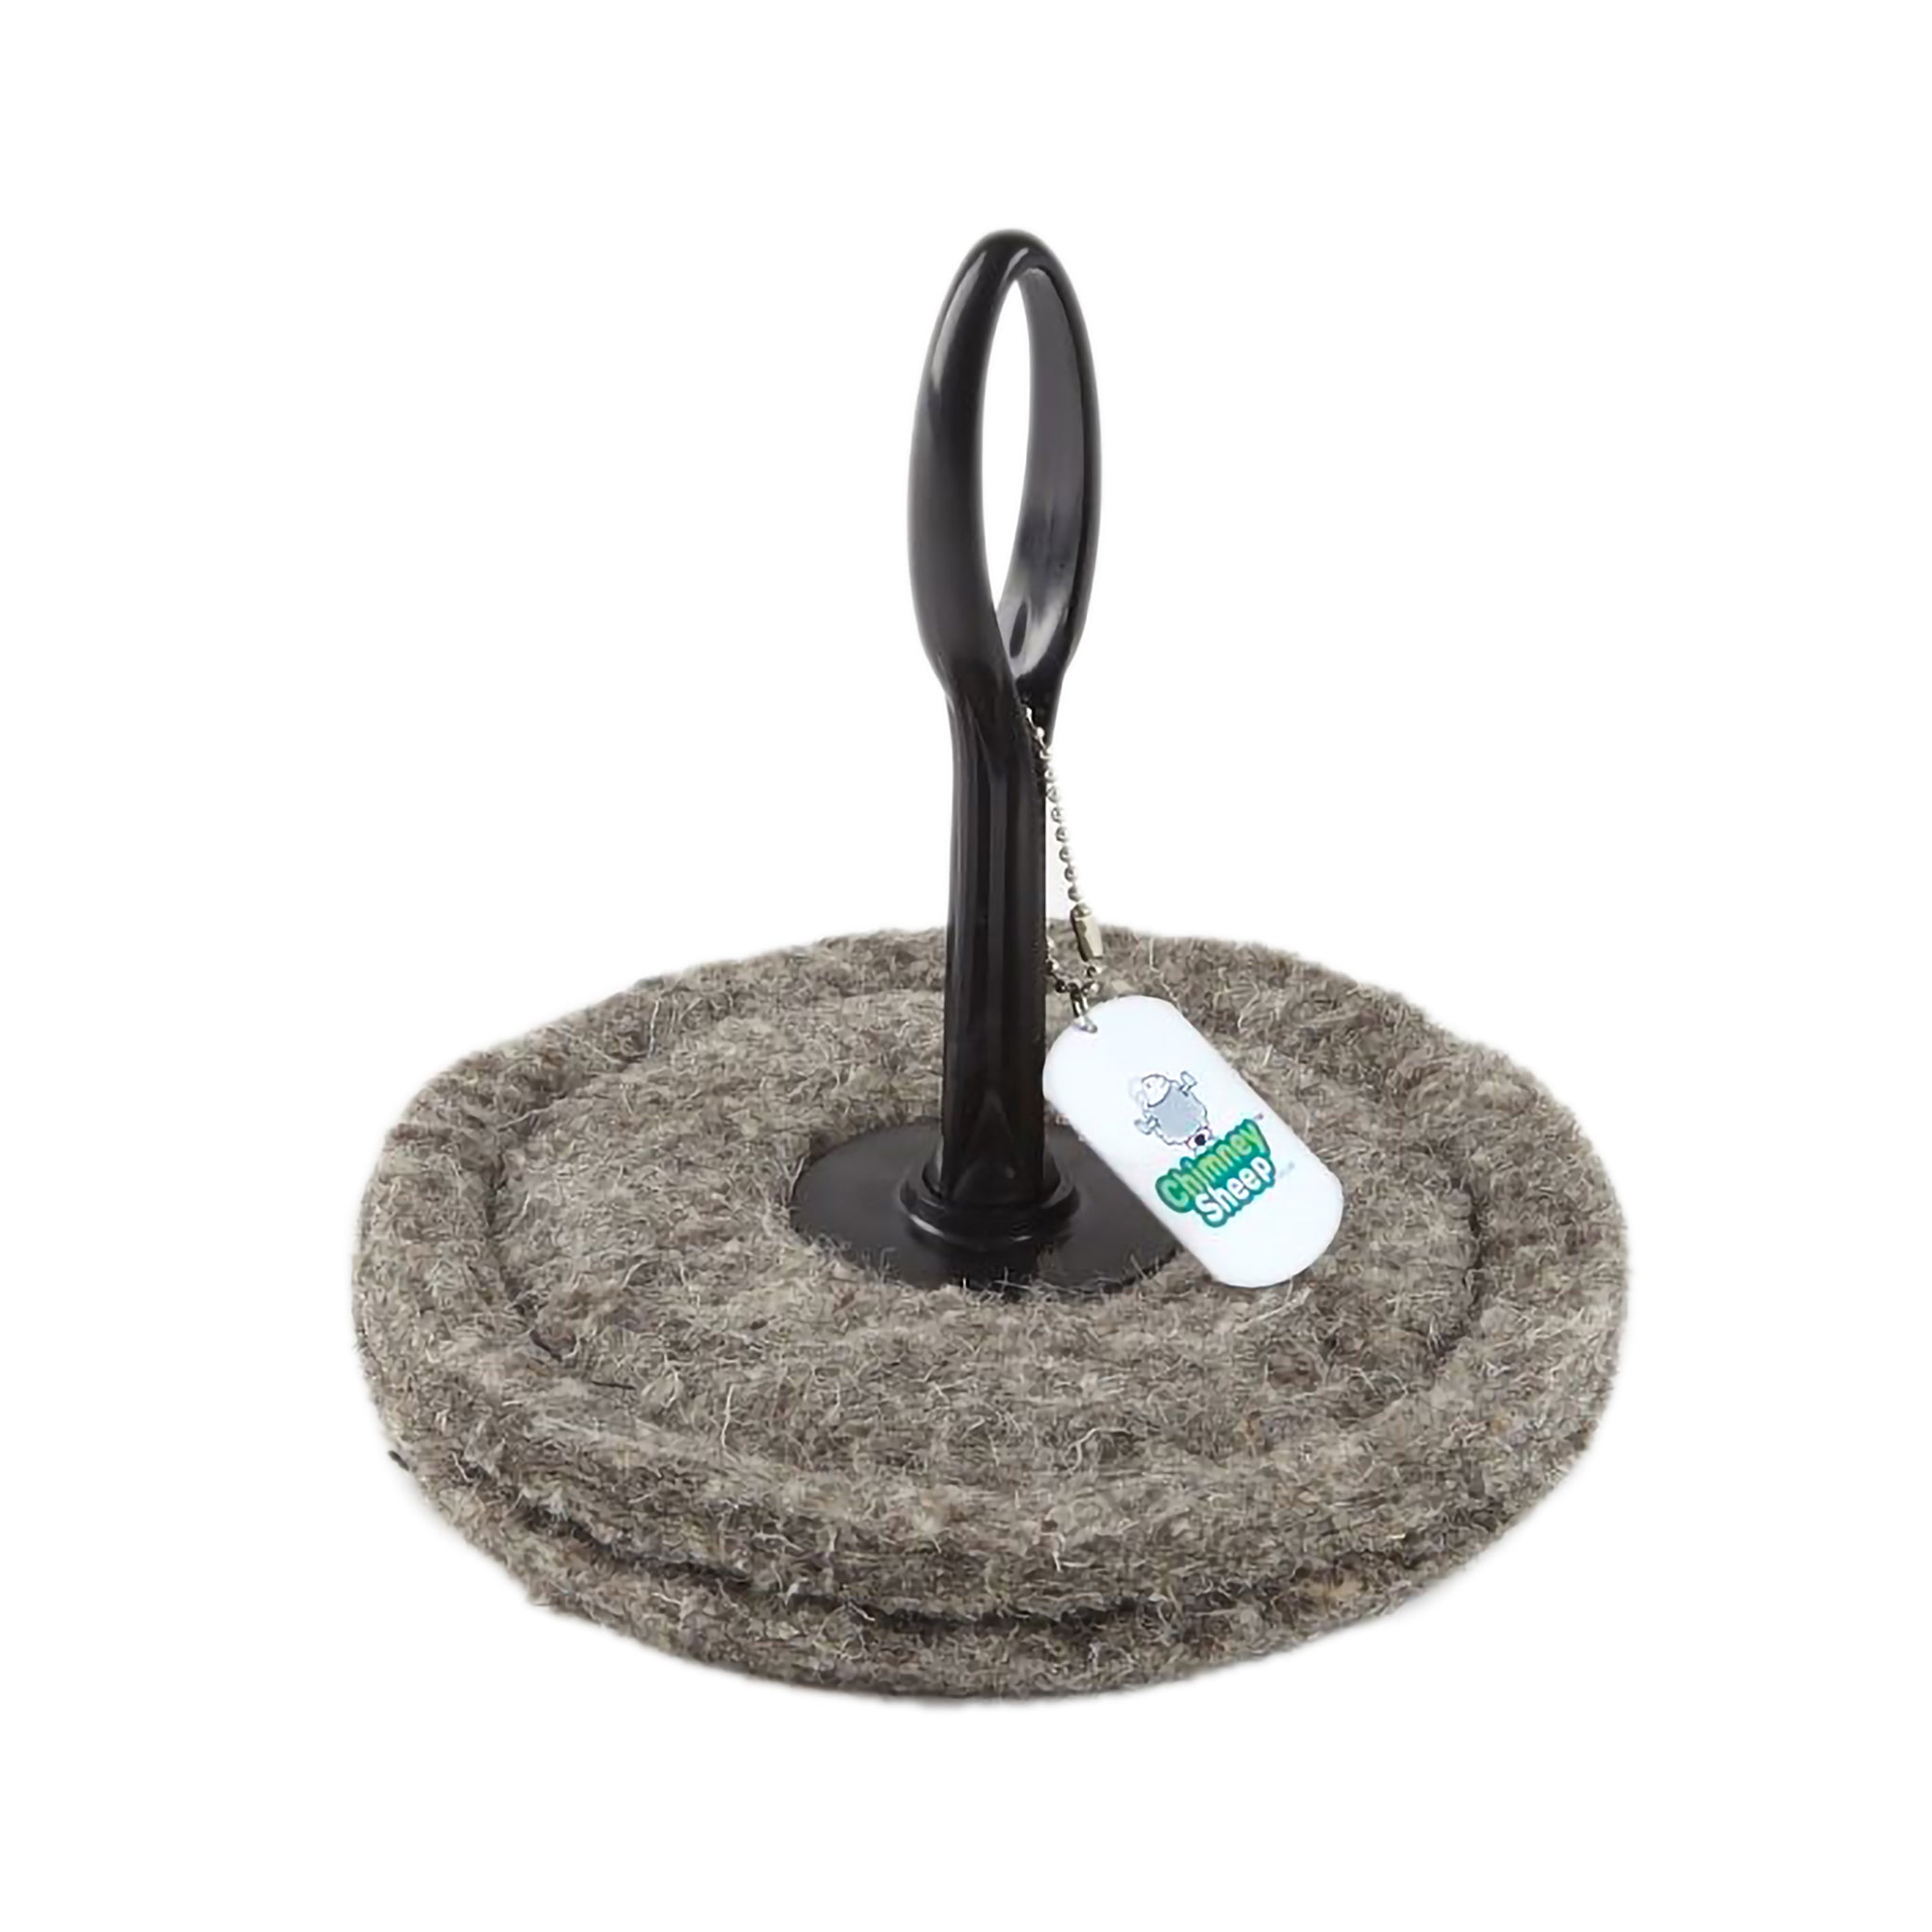 Small round chimney blocker with recycled plastic handle.